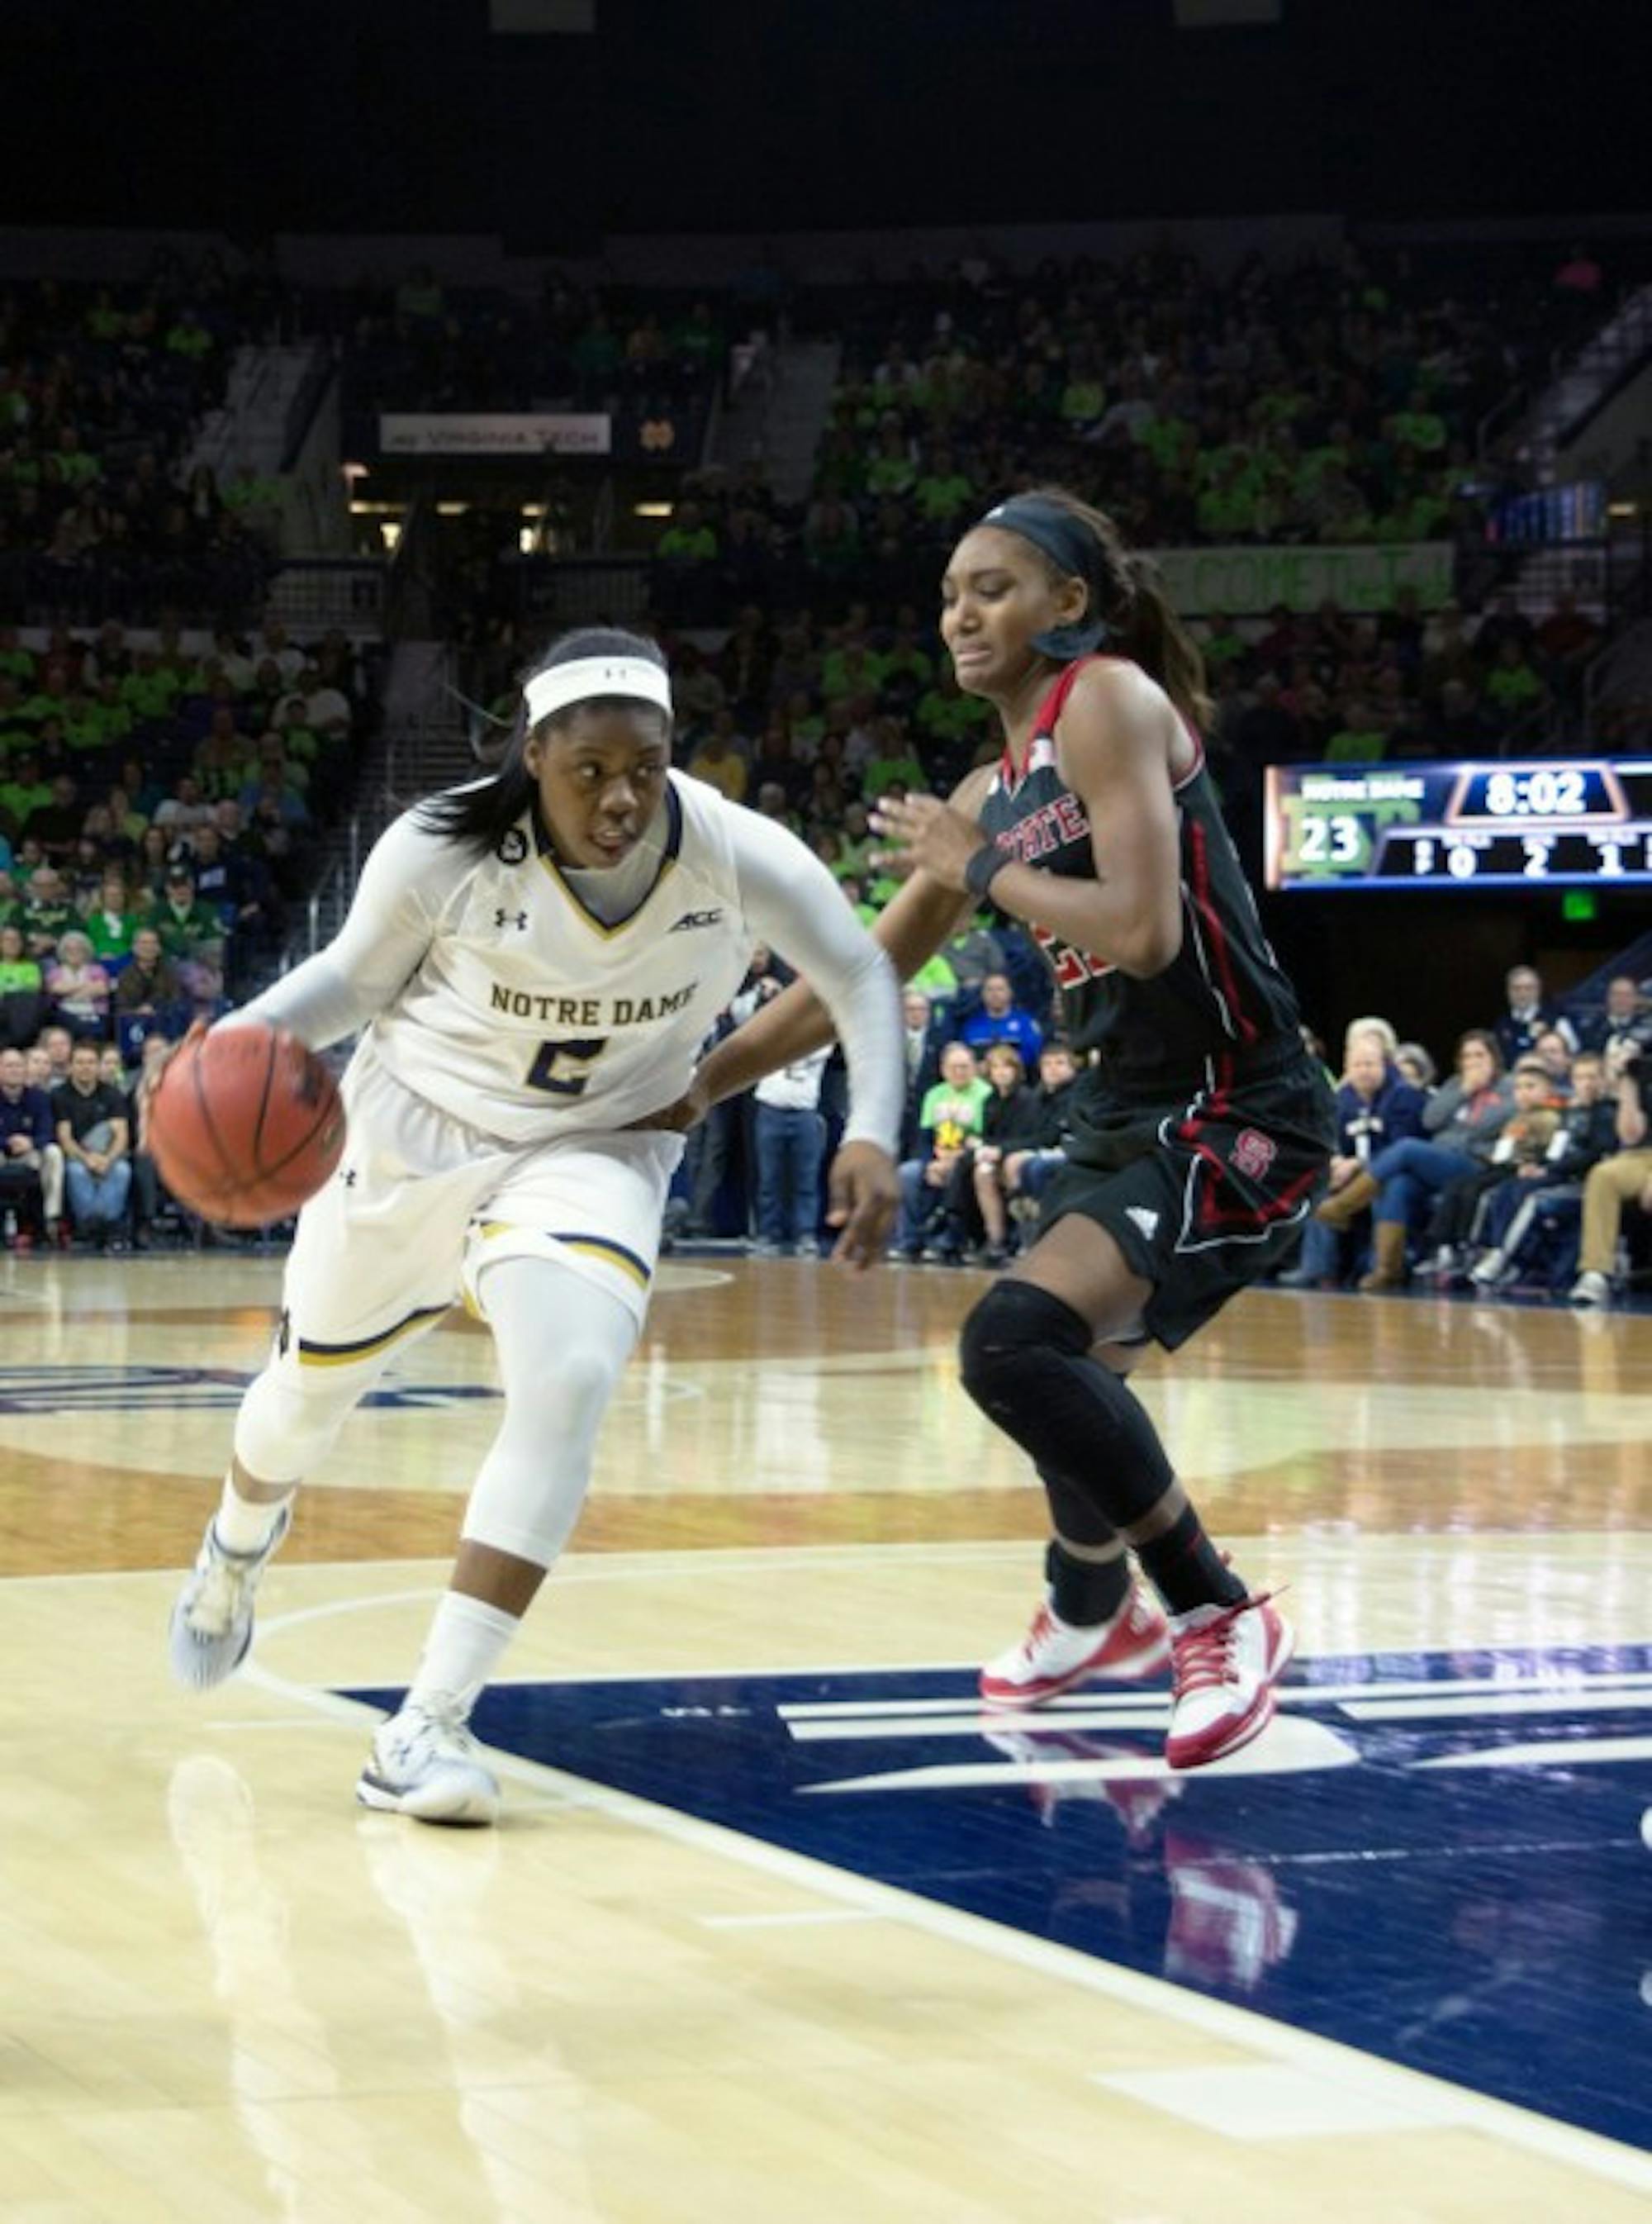 Irish freshman guard Arike Ogunbowale drives to the hoop during Notre Dame’s 82-46 victory over North Carolina State on Thursday at Purcell Pavilion. Ogunbowale scored a team-high 15 points and grabbed four rebounds during her team’s victory over Louisville on Sunday.